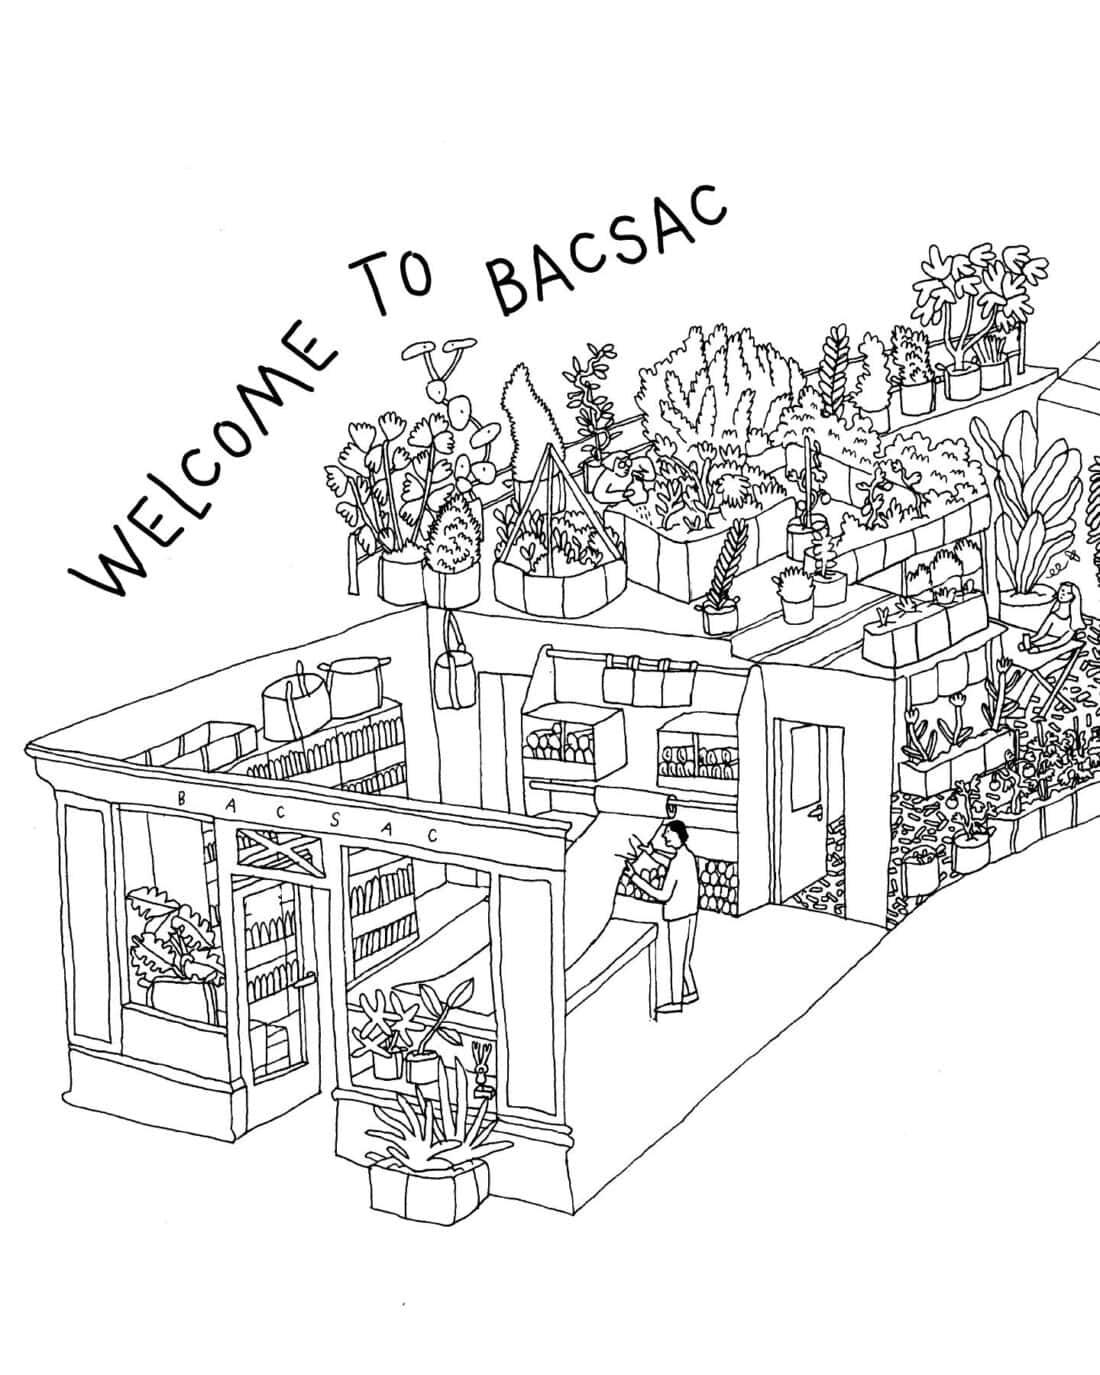 Line drawing of an urban garden with the phrase "welcome to bacsac" at the top, featuring plants in various containers and a person tending to the plants.